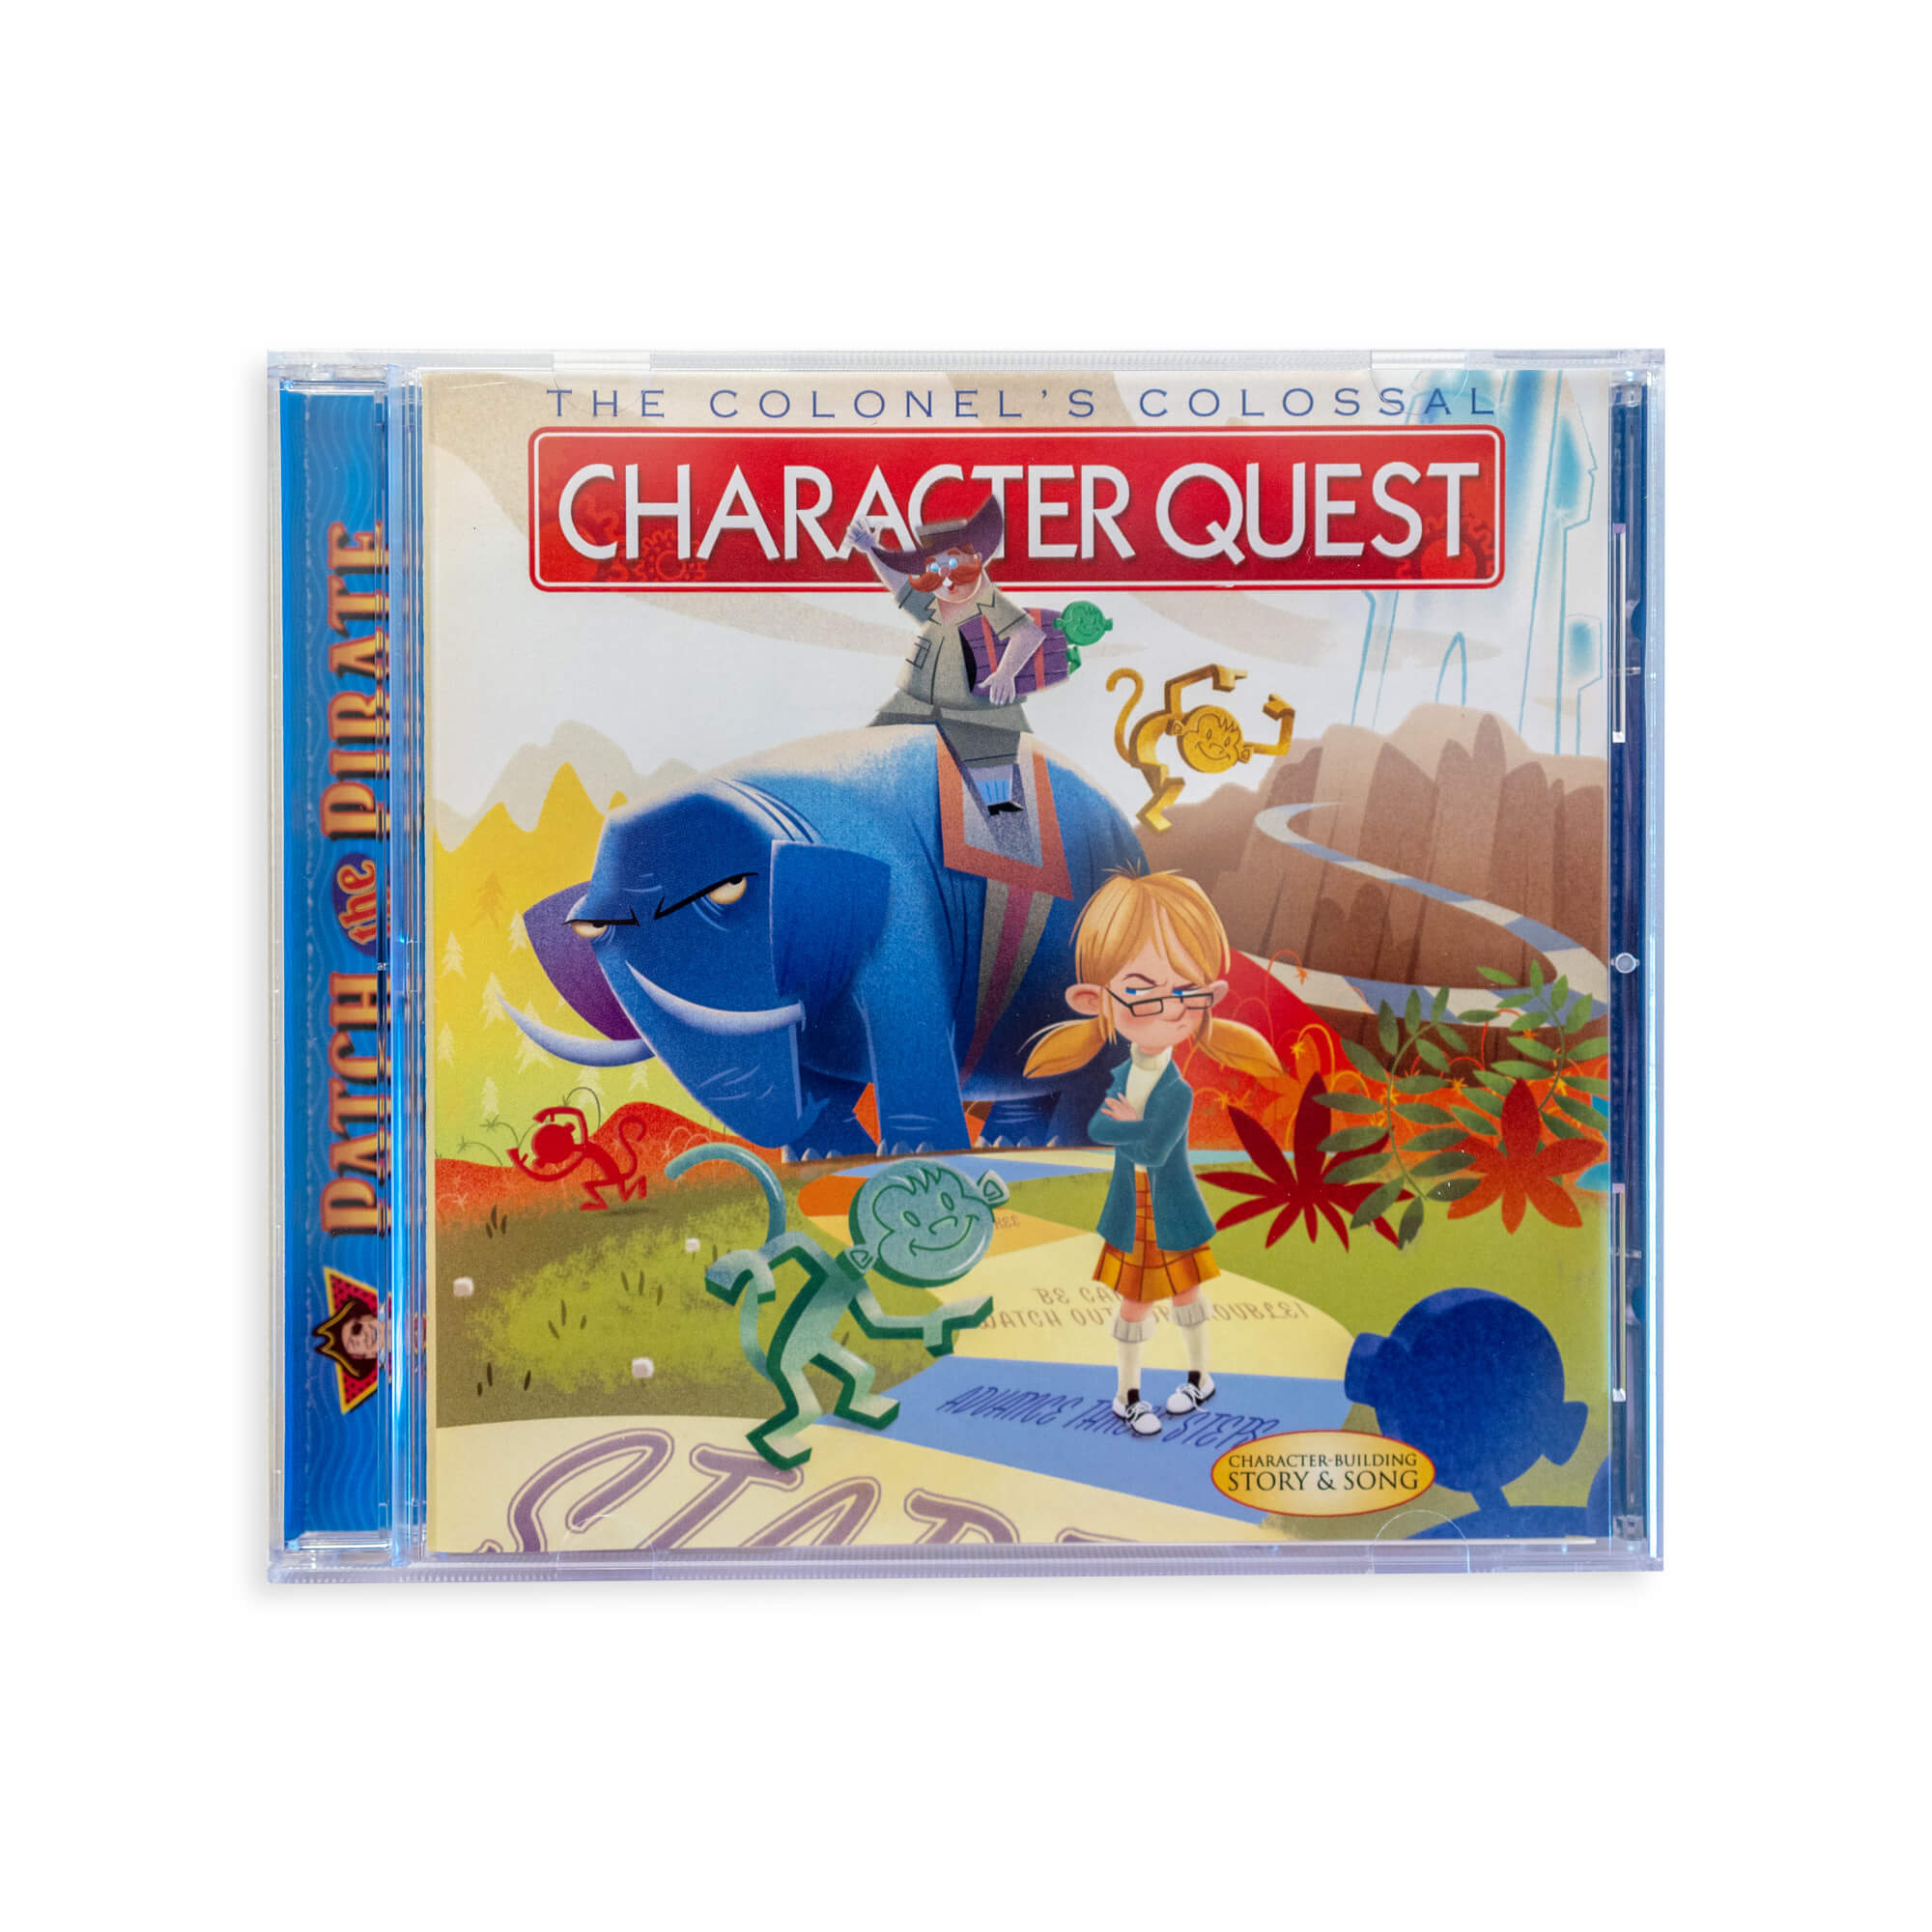 The Colonel's Colossal Character Quest Audio Drama CD